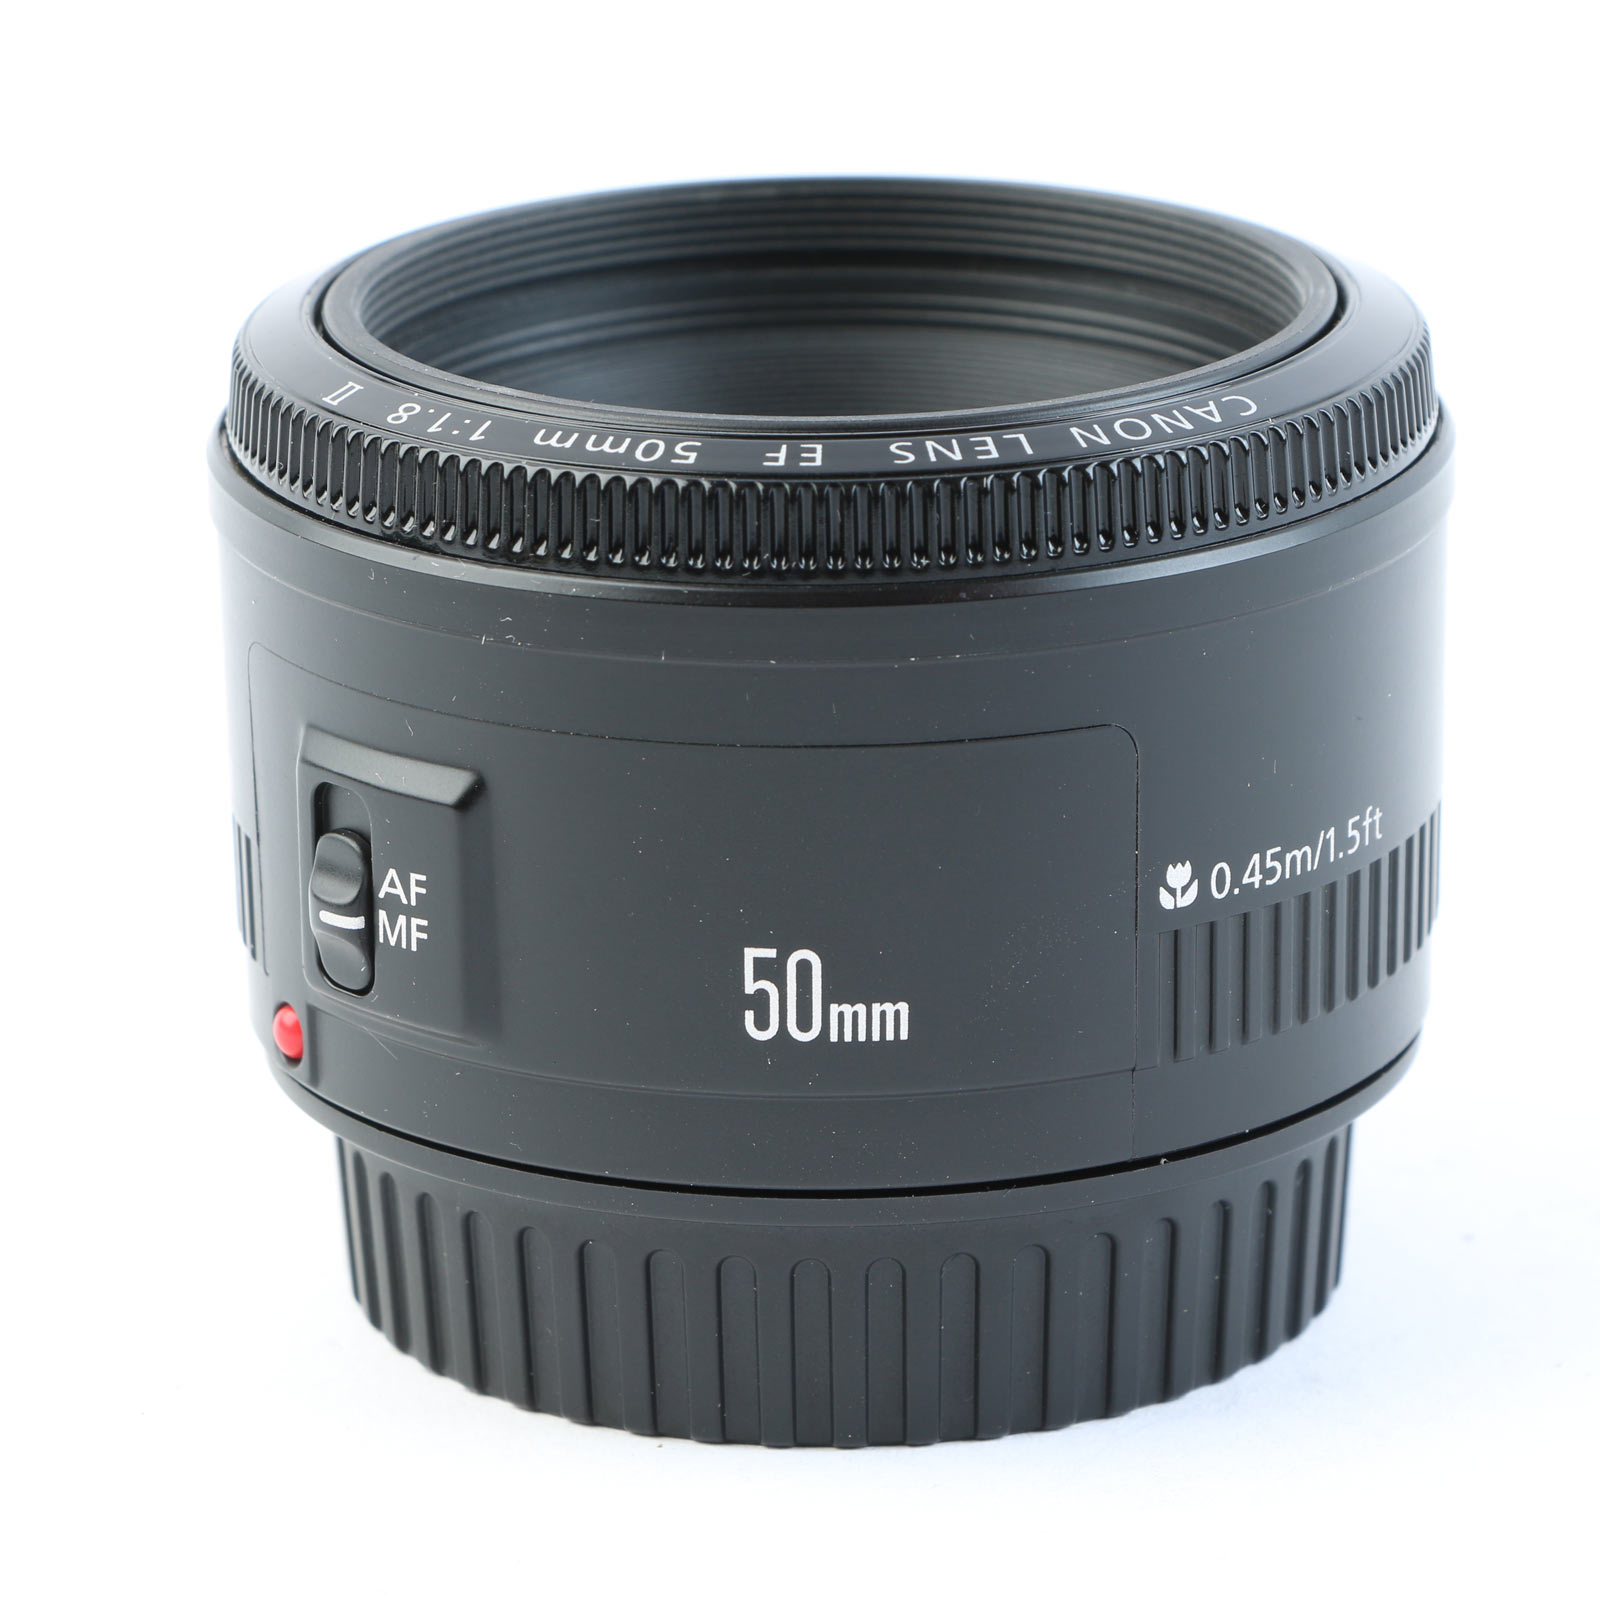 USED Canon EF 50mm f1.8 II Lens | Wex Photo Video